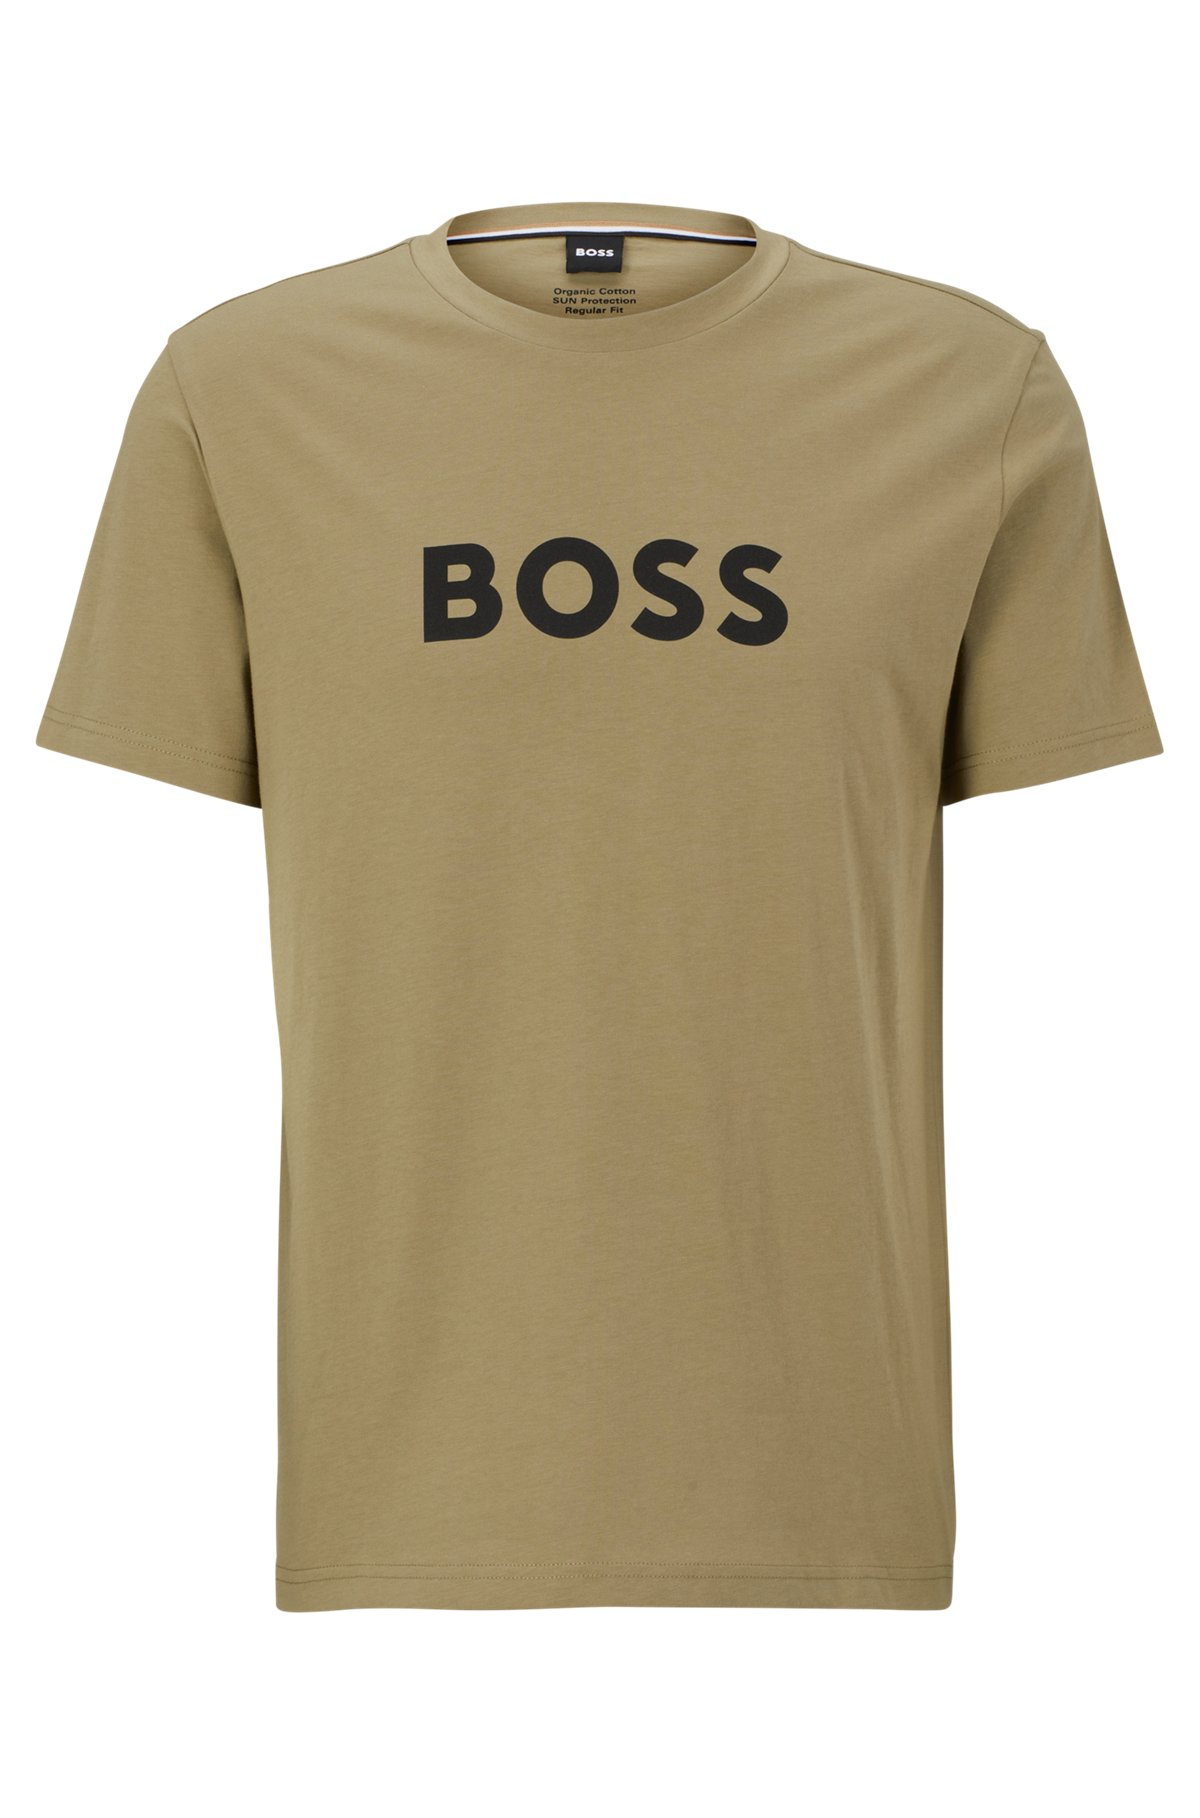 Cotton T-shirt with contrast logo, Light Green